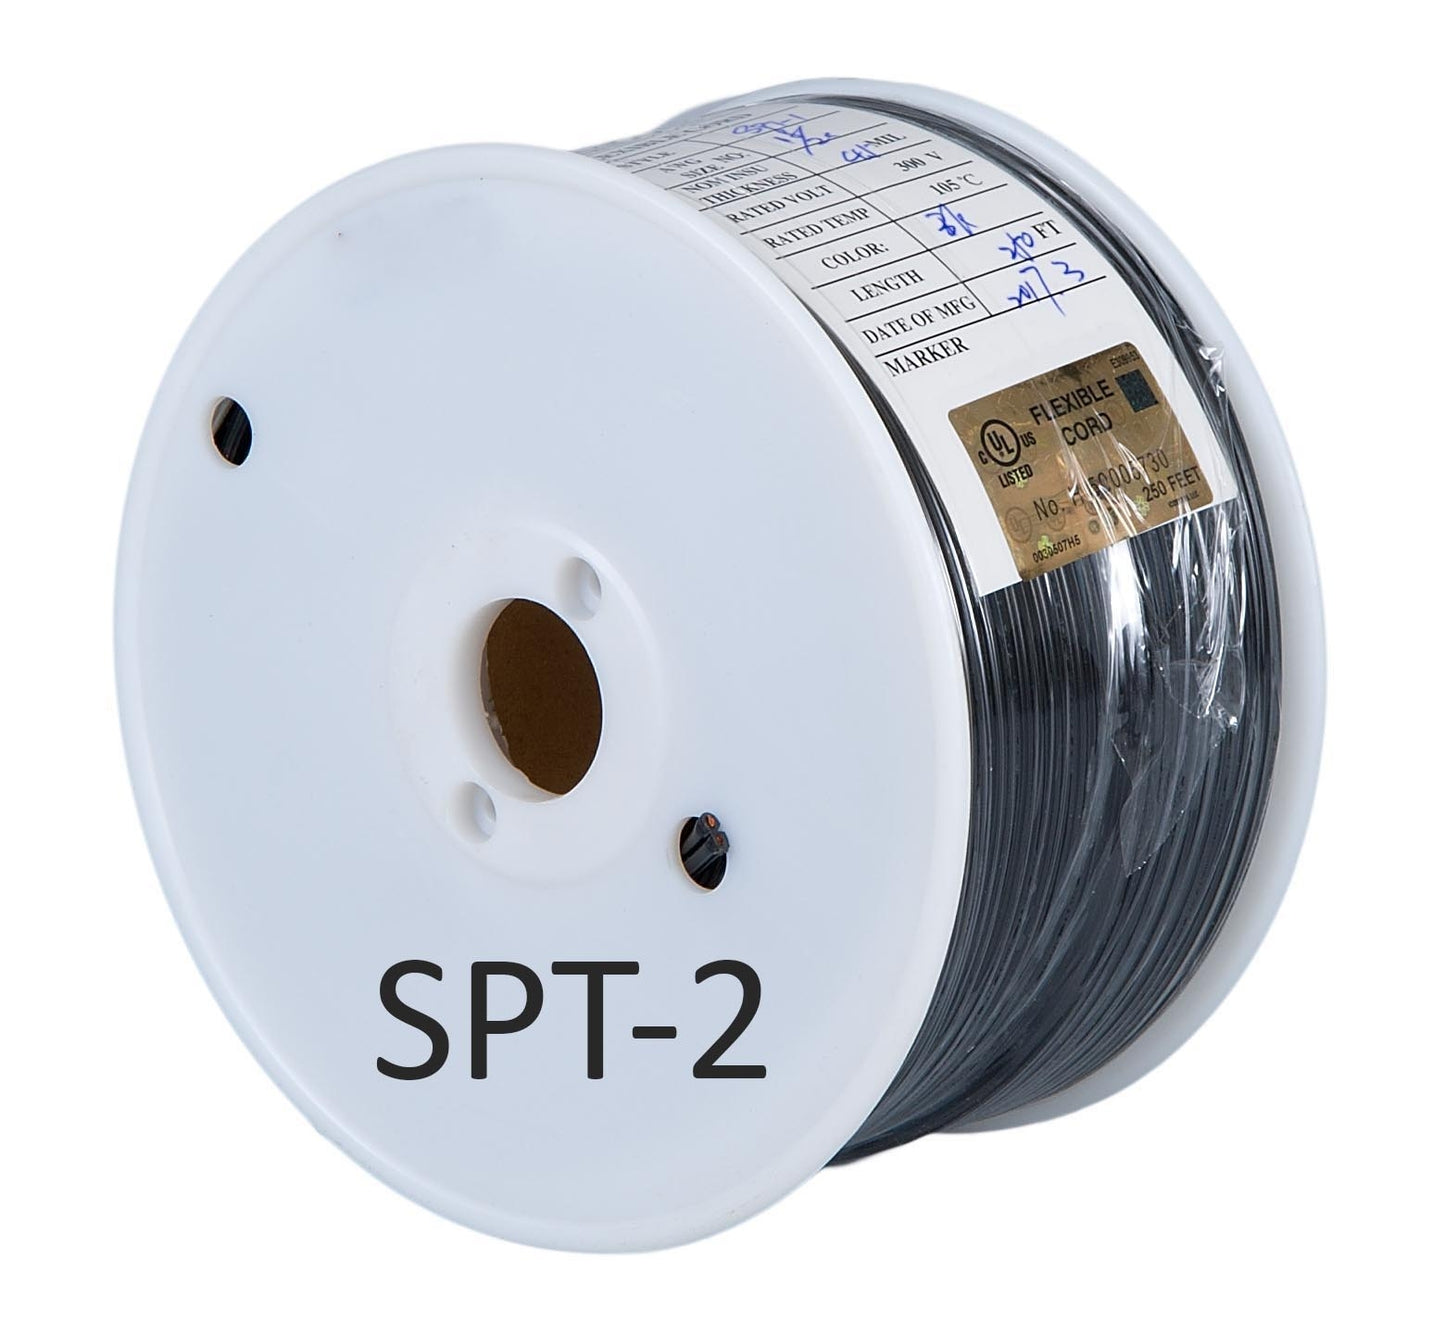 250 Ft. Spool, 18/2, SPT-2 General Purpose, Plastic Covered Lamp Cord - Wire, 105 degree C, 300V - CHOICE of 5 COLORS